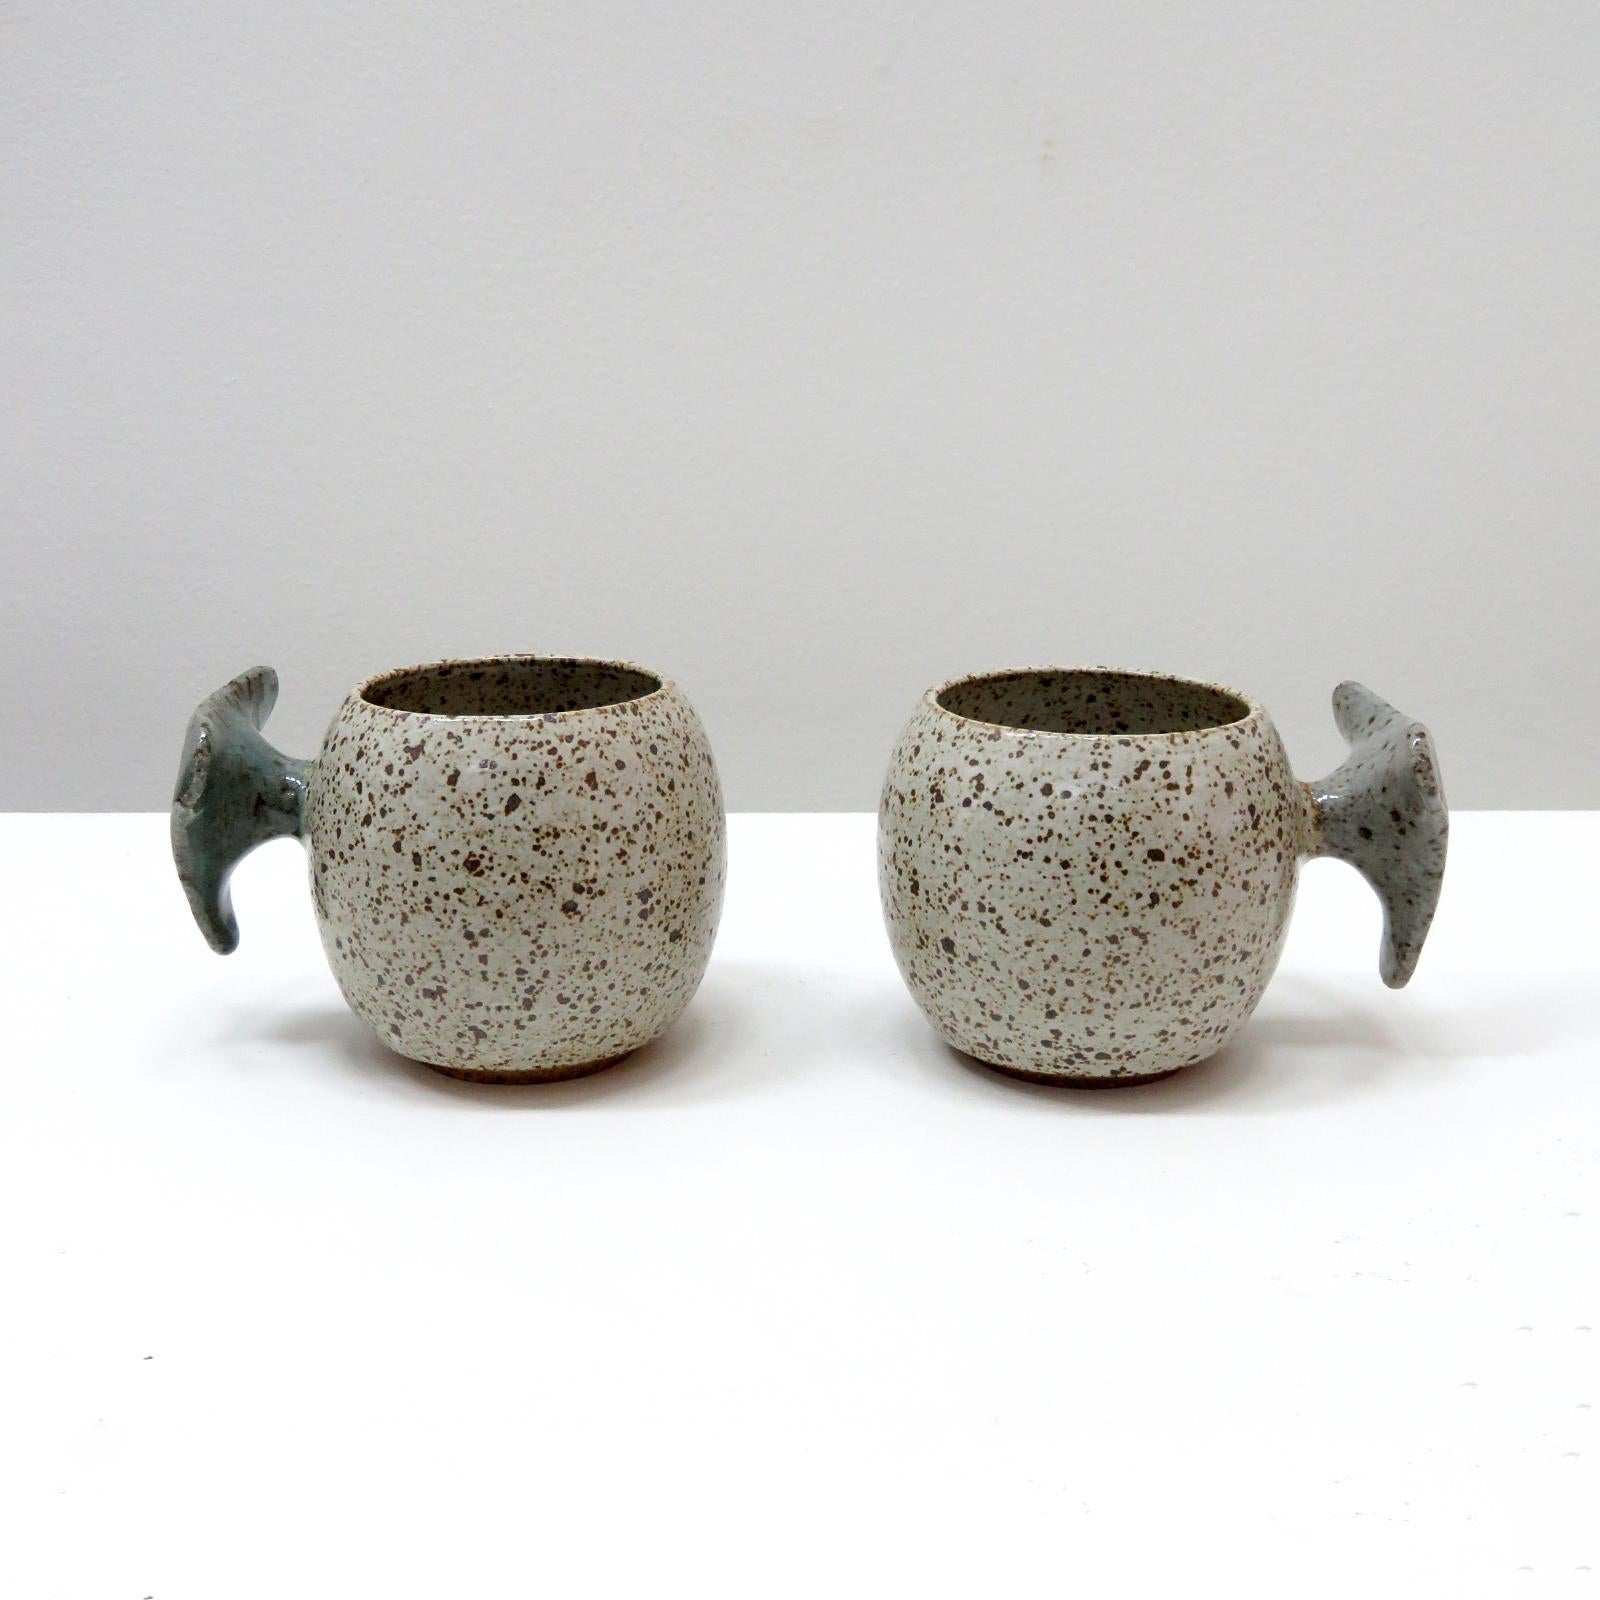 wonderful 'Valve' mugs, handcrafted by Los Angeles based ceramicist Jed Farlow. High fired stoneware with matte white speckled glaze. Designed with a human-centered approach in mind, these one-of-a-kind mugs are experimenting with handle designs to